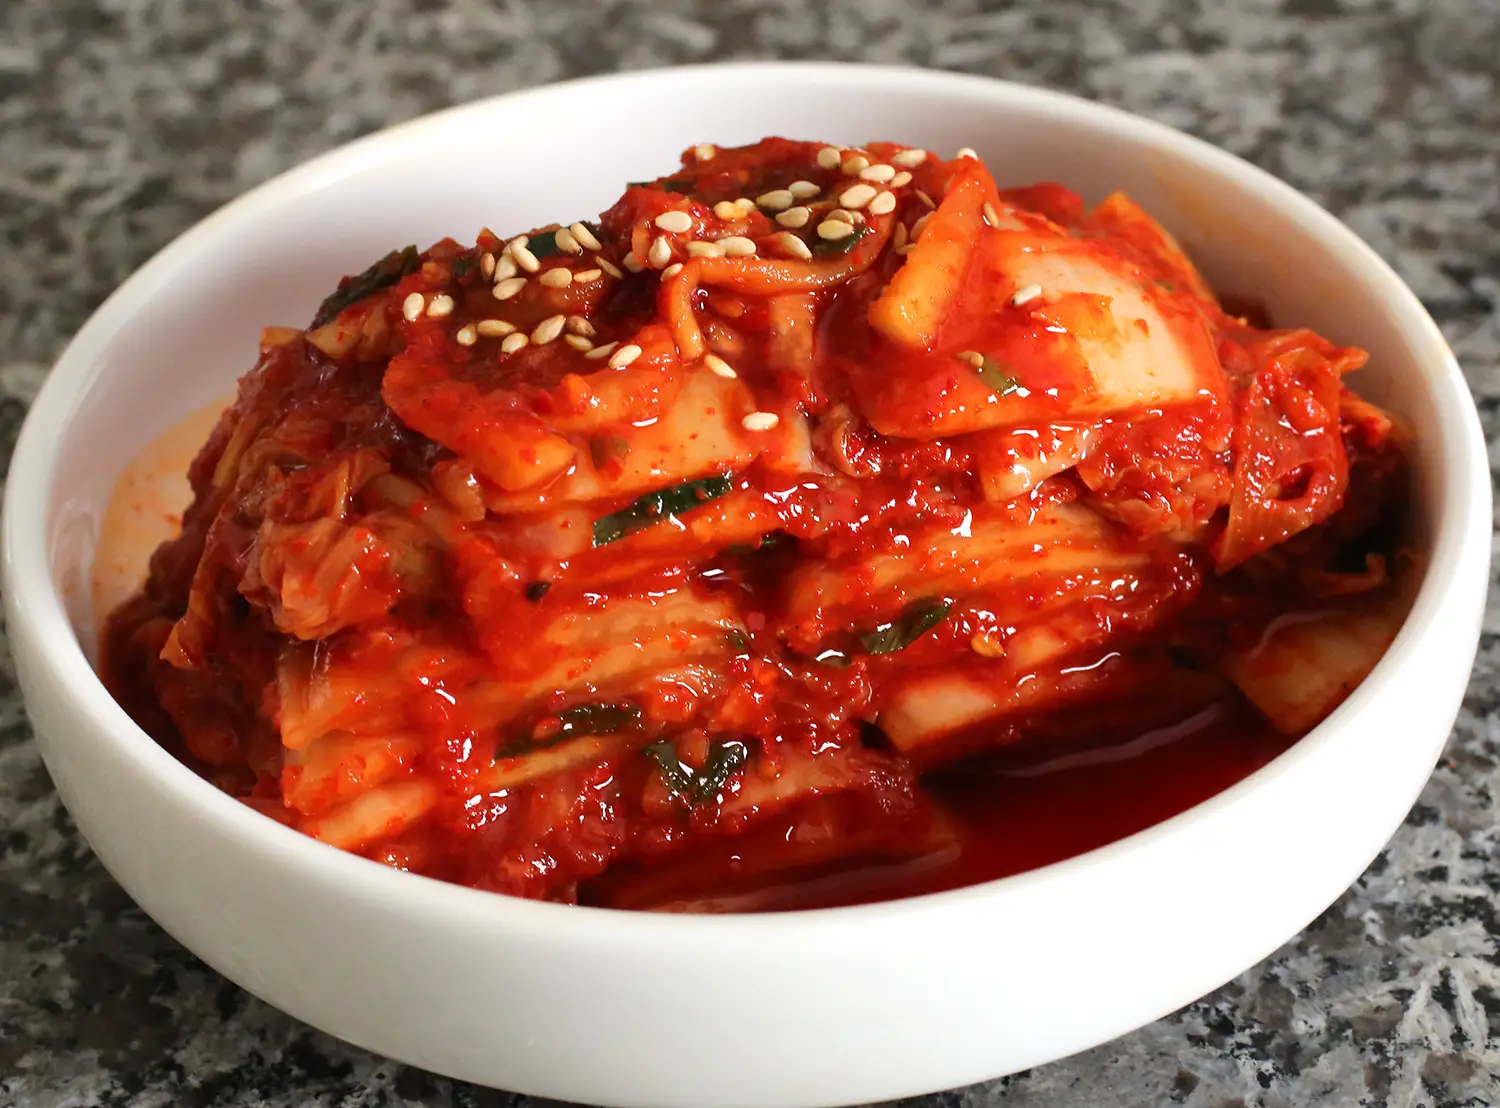 Where To Buy And Find Kimchi In The Grocery Store